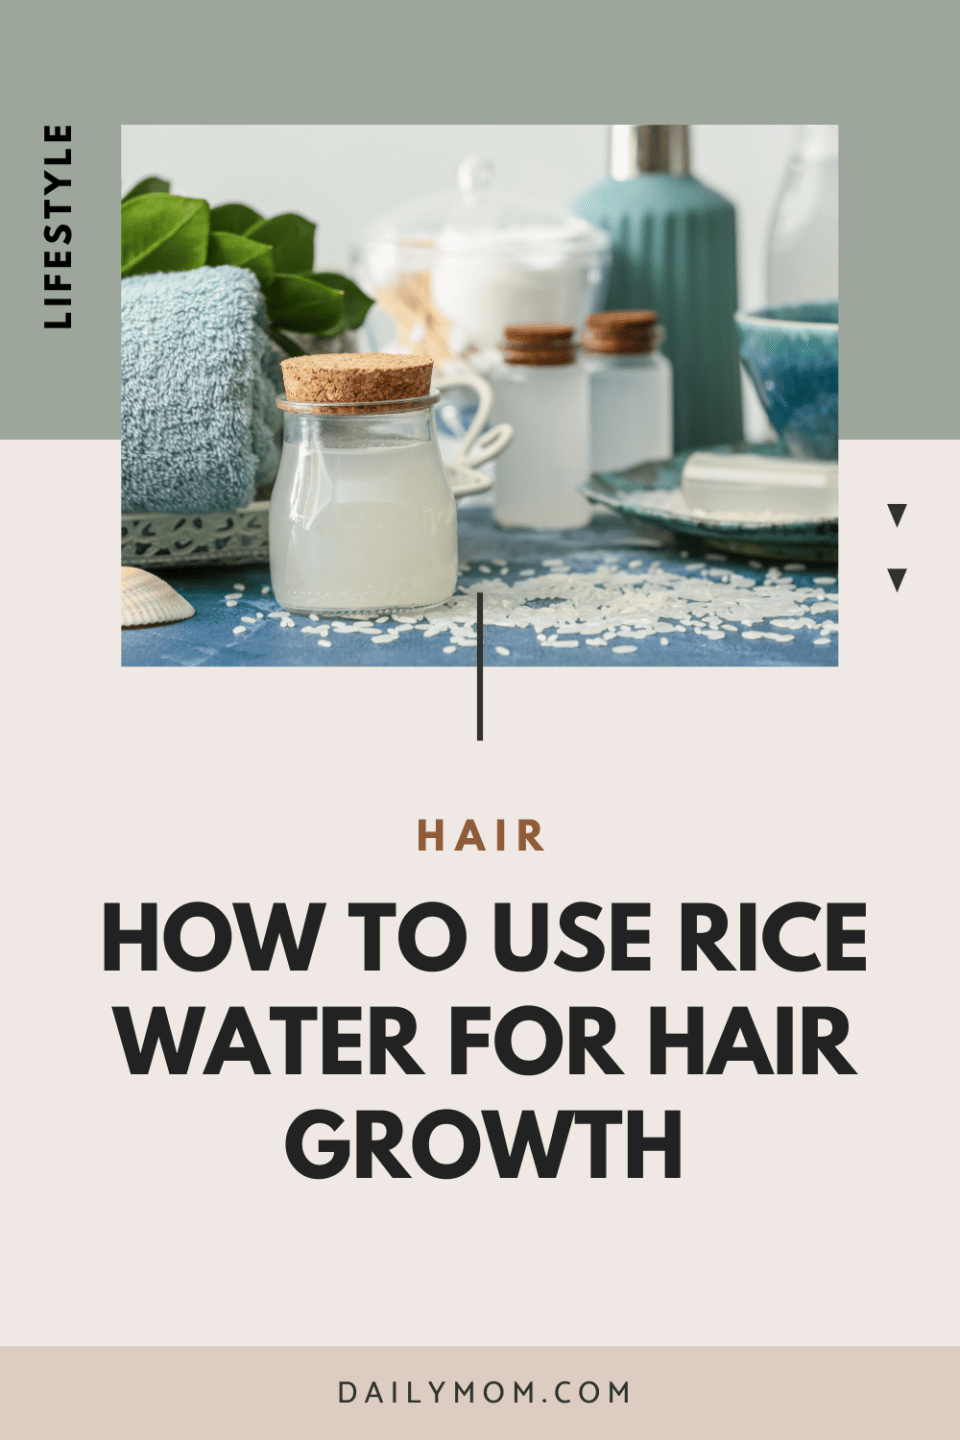 How To Use Rice Water For Hair Growth - Make And Use Rice Water To Help With Hair Growth And Help Your Hair Grow Longer  1 Daily Mom, Magazine For Families